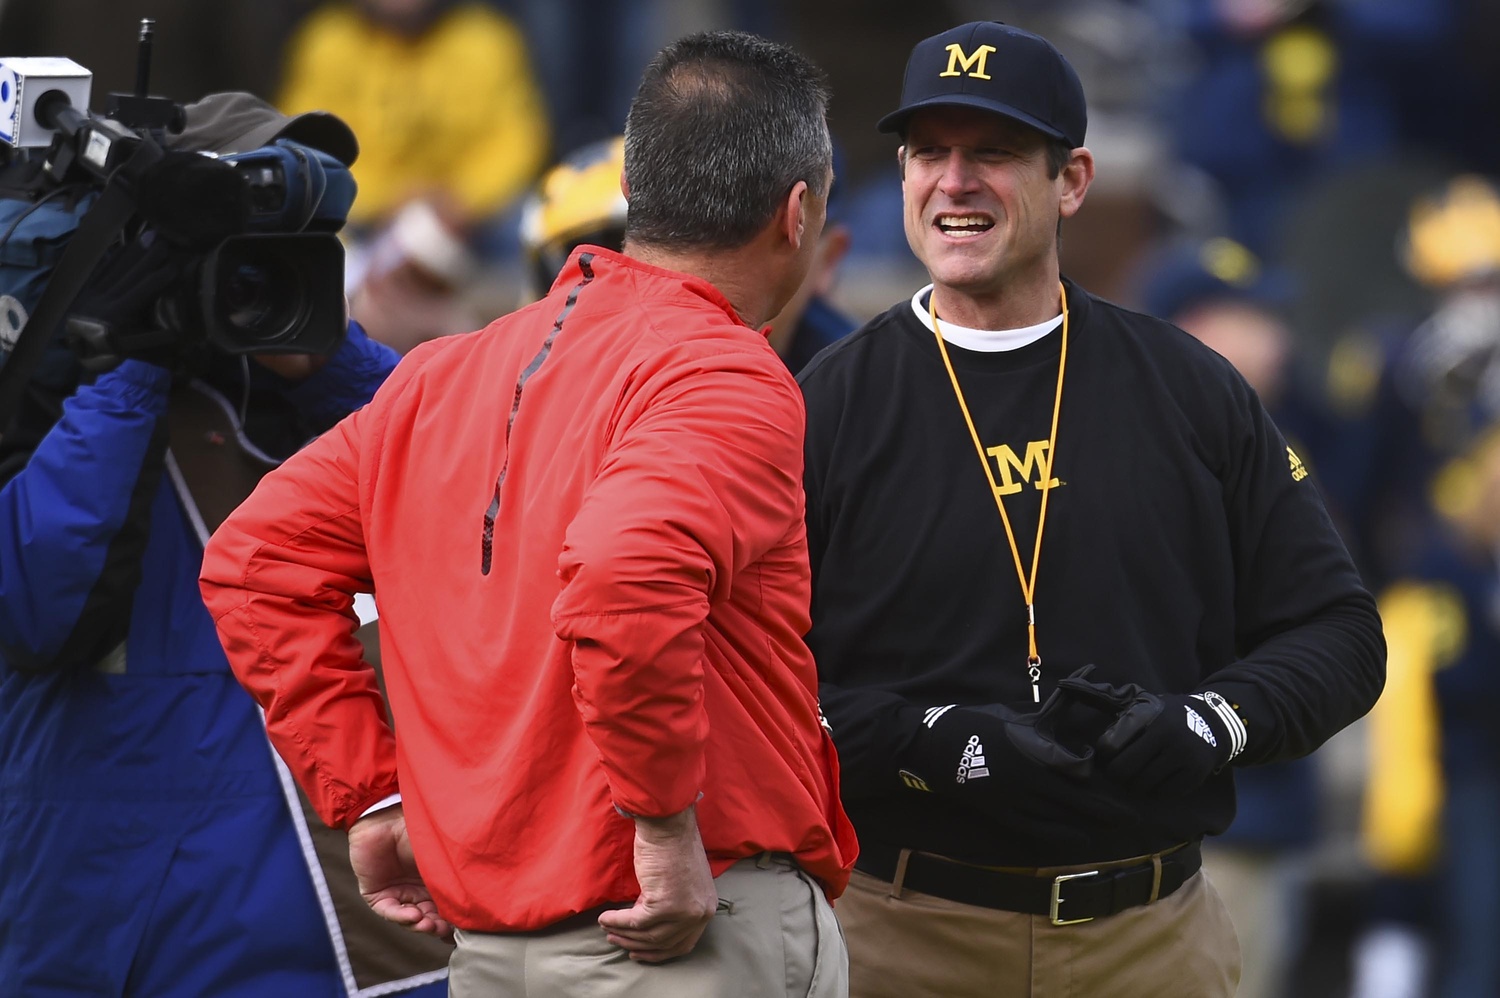 Urban Meyer and Jim Harbaugh will clash in college football Week 12